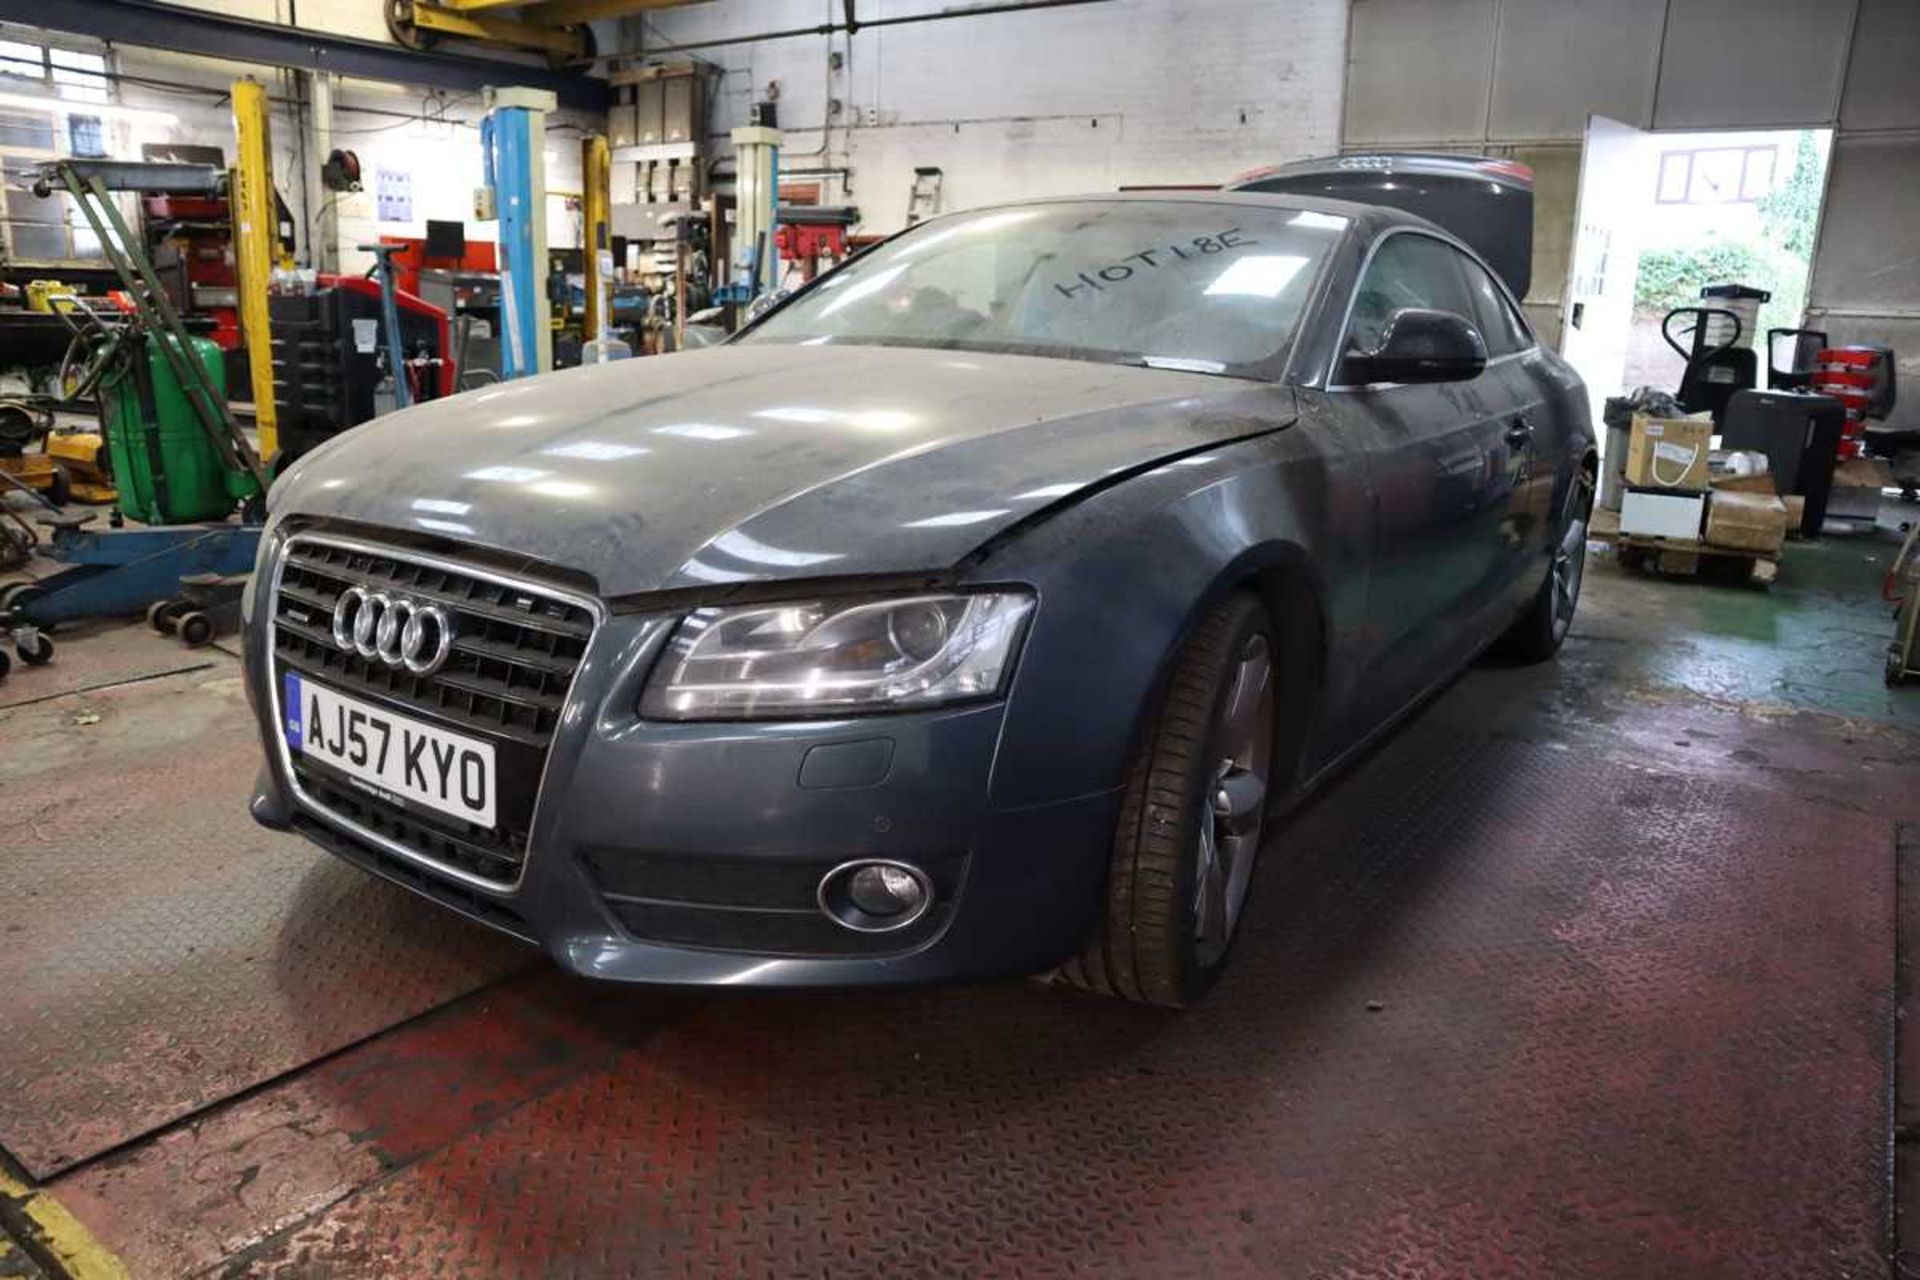 +VAT AJ57 KYO Audi A5 3L TDI Quatro 3 door coupe/saloon, with key and v5 registration document, - Image 2 of 10